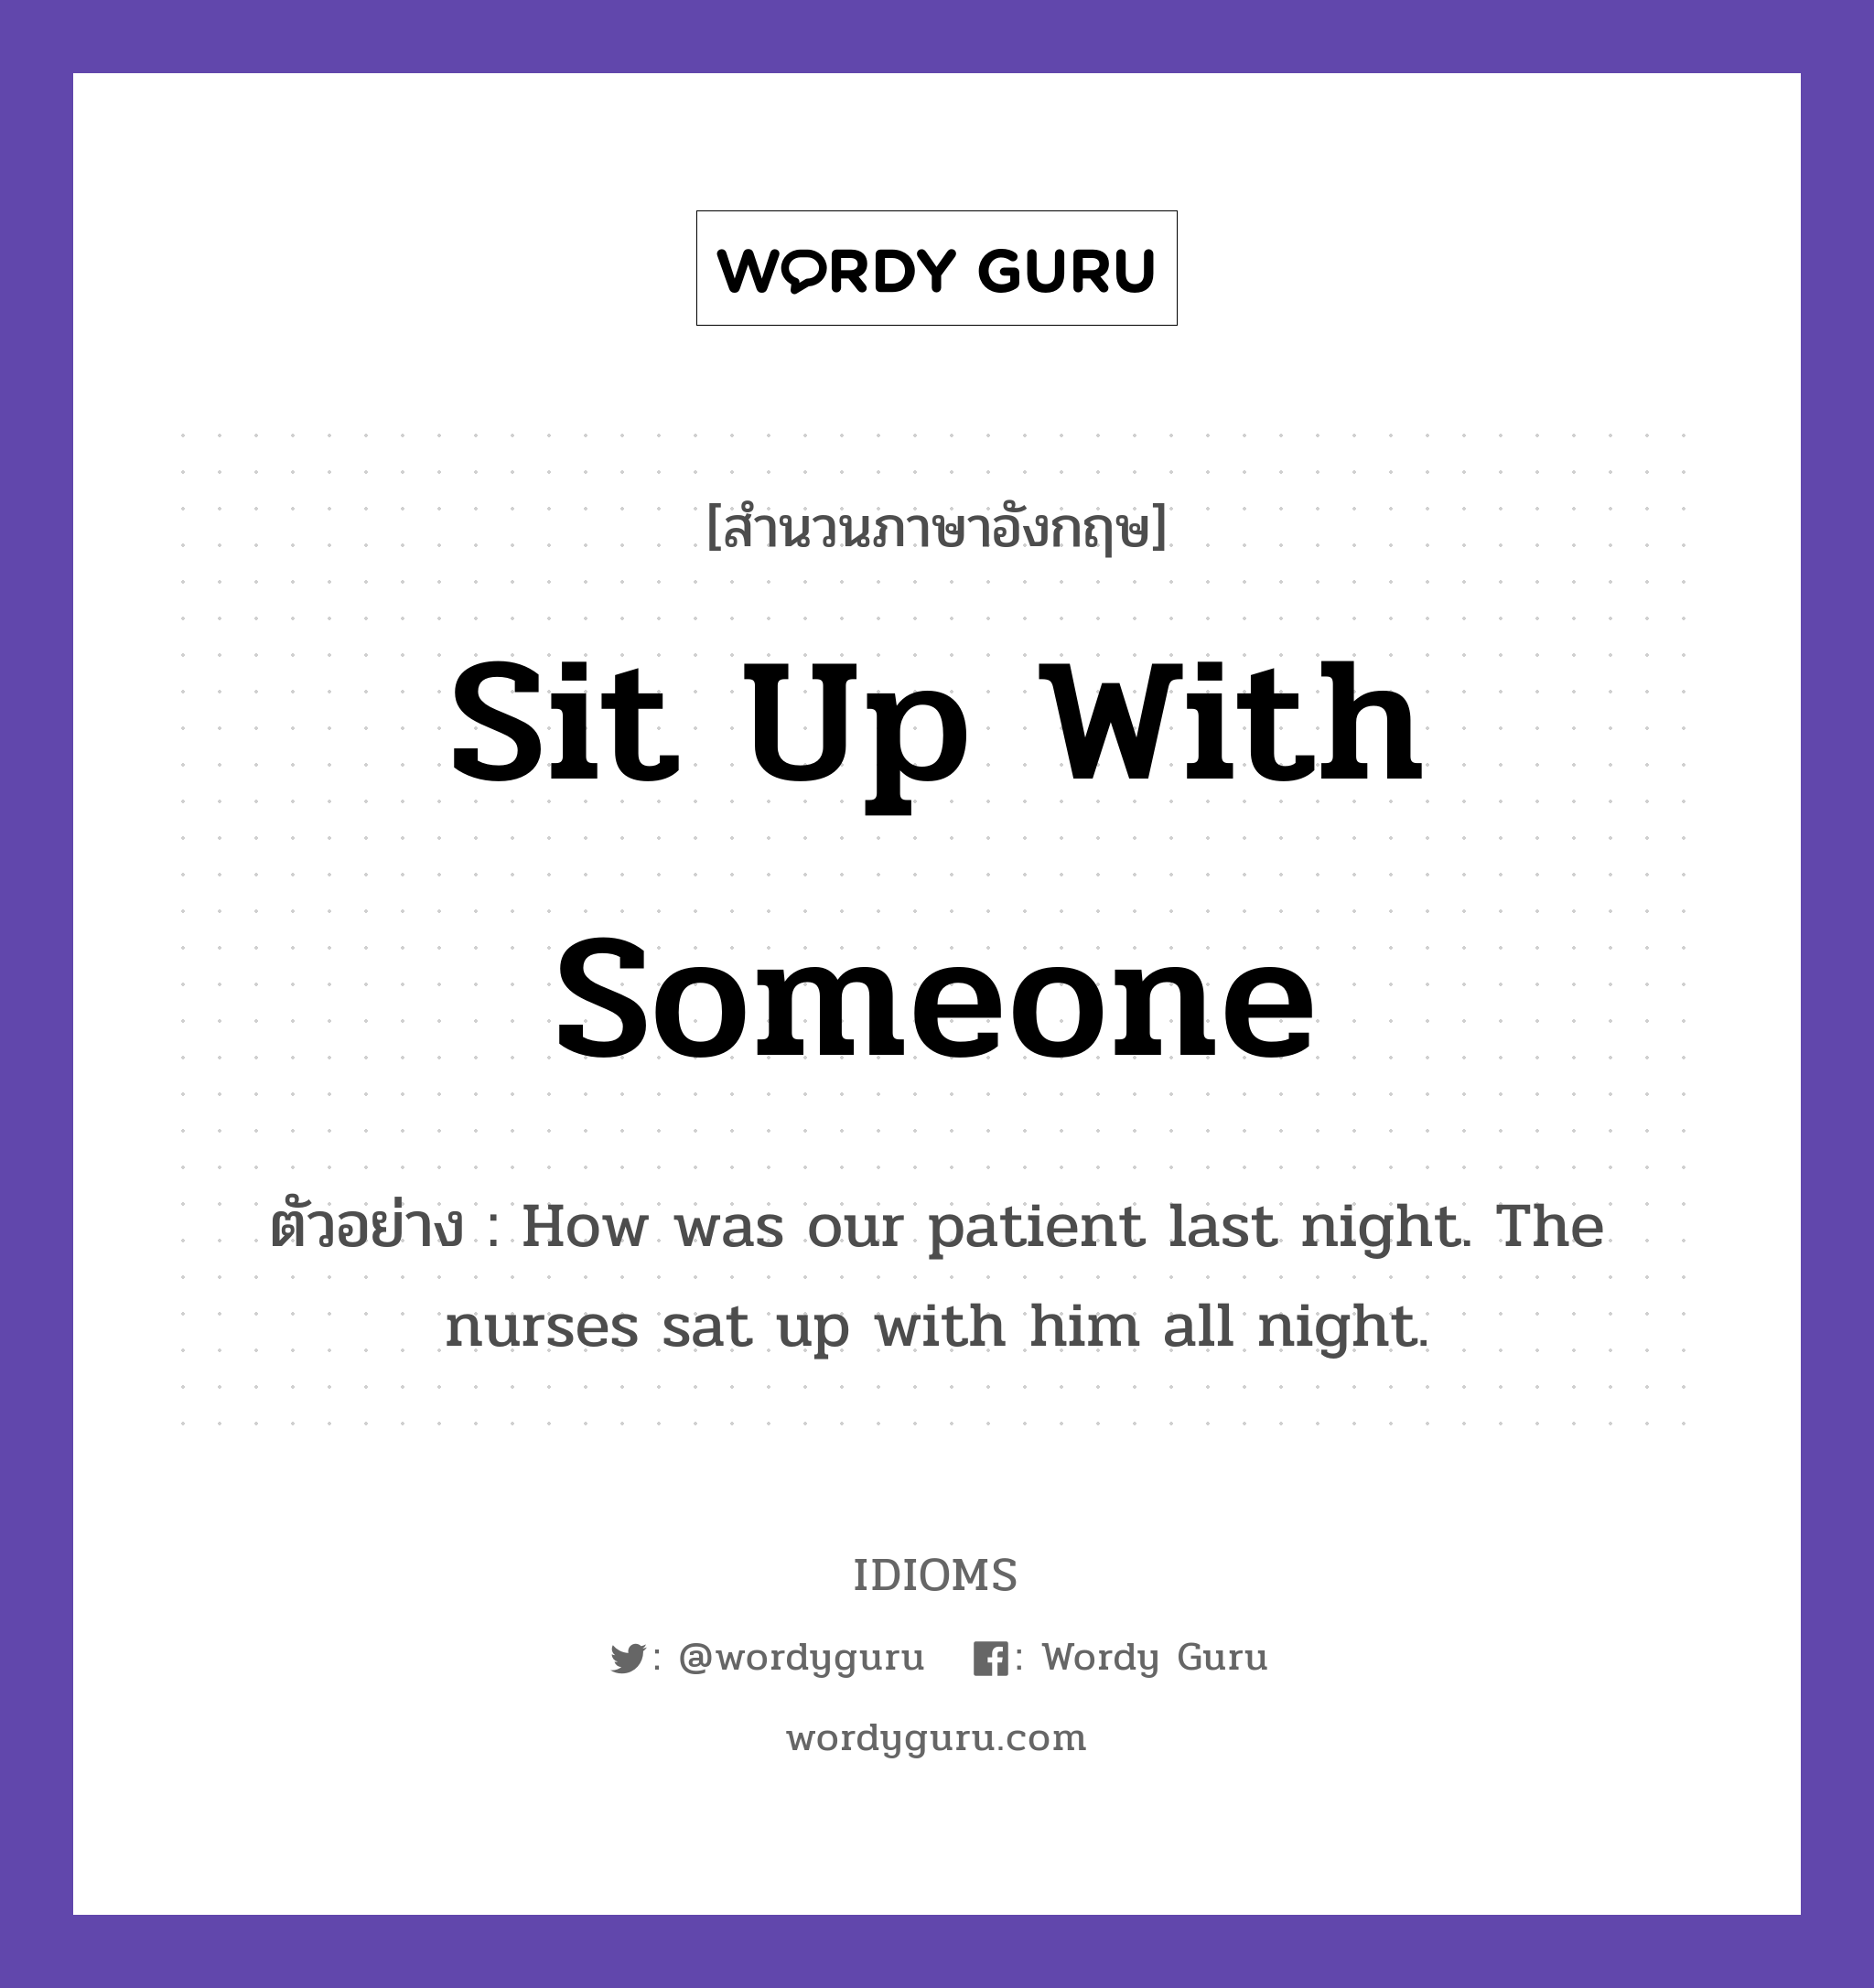 Sit Up With Someone แปลว่า?, สำนวนภาษาอังกฤษ Sit Up With Someone ตัวอย่าง How was our patient last night. The nurses sat up with him all night.